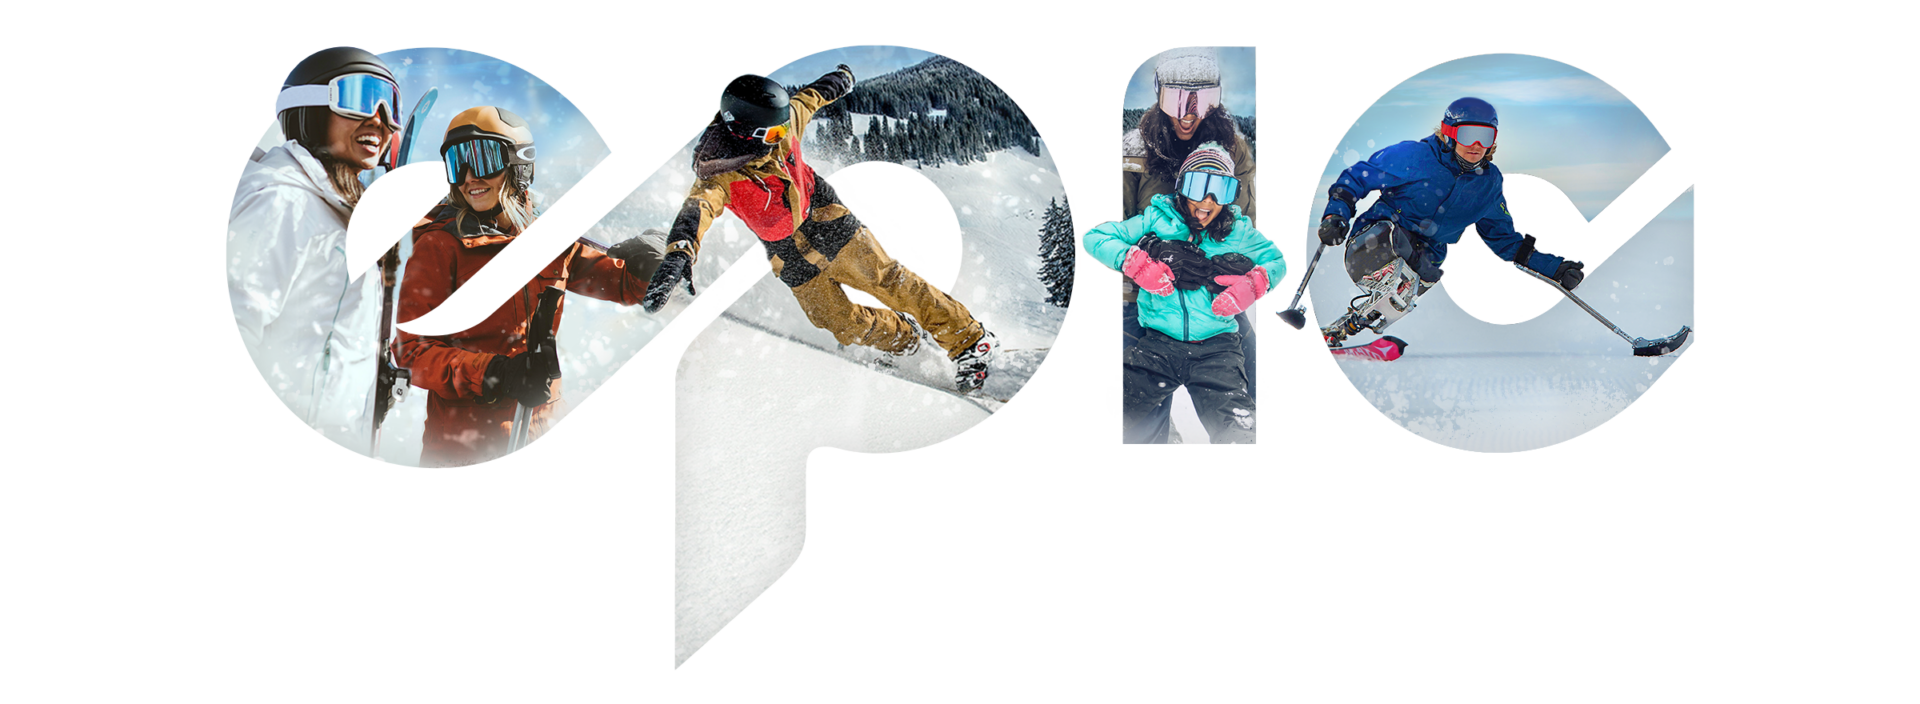 epic logo with skiing images cut into it